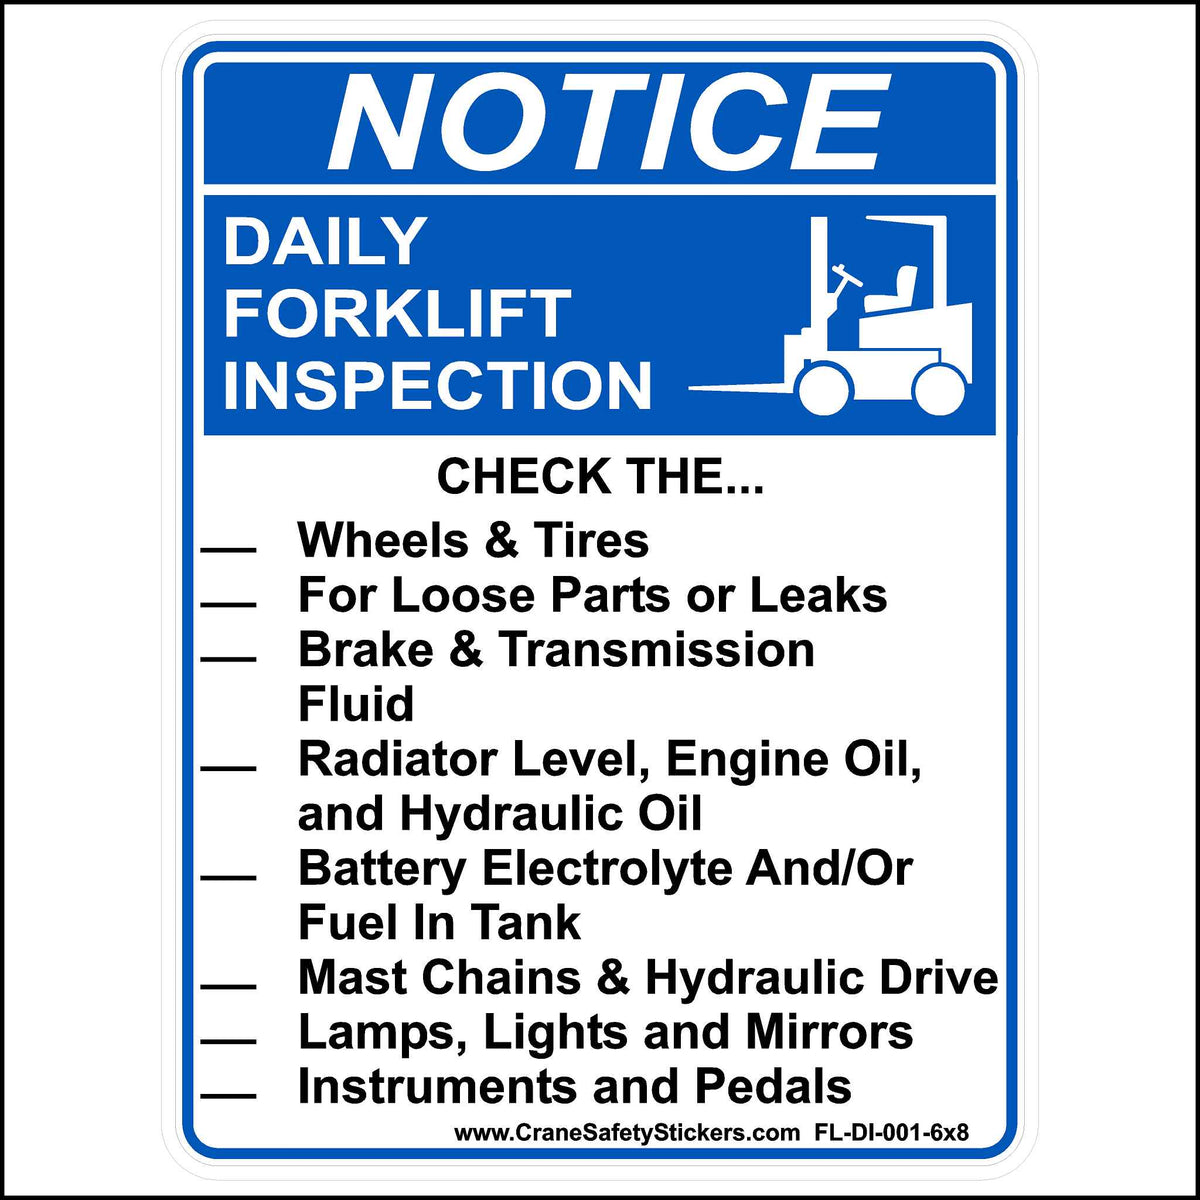 Daily Forklift Inspection Checklist Sticker, printed with. NOTICE, DAILY FORKLIFT INSPECTION. CHECK THE. Wheels &amp; Tires For Loose Parts or Leaks, Brake &amp; Transmission Fluid, Radiator Level, Engine Oil, and Hydraulic Oil, Battery Electrolyte And/Or Fuel In Tank, Mast Chains &amp; Hydraulic Drive, Lamps, Lights and Mirrors, Instruments and Pedals.